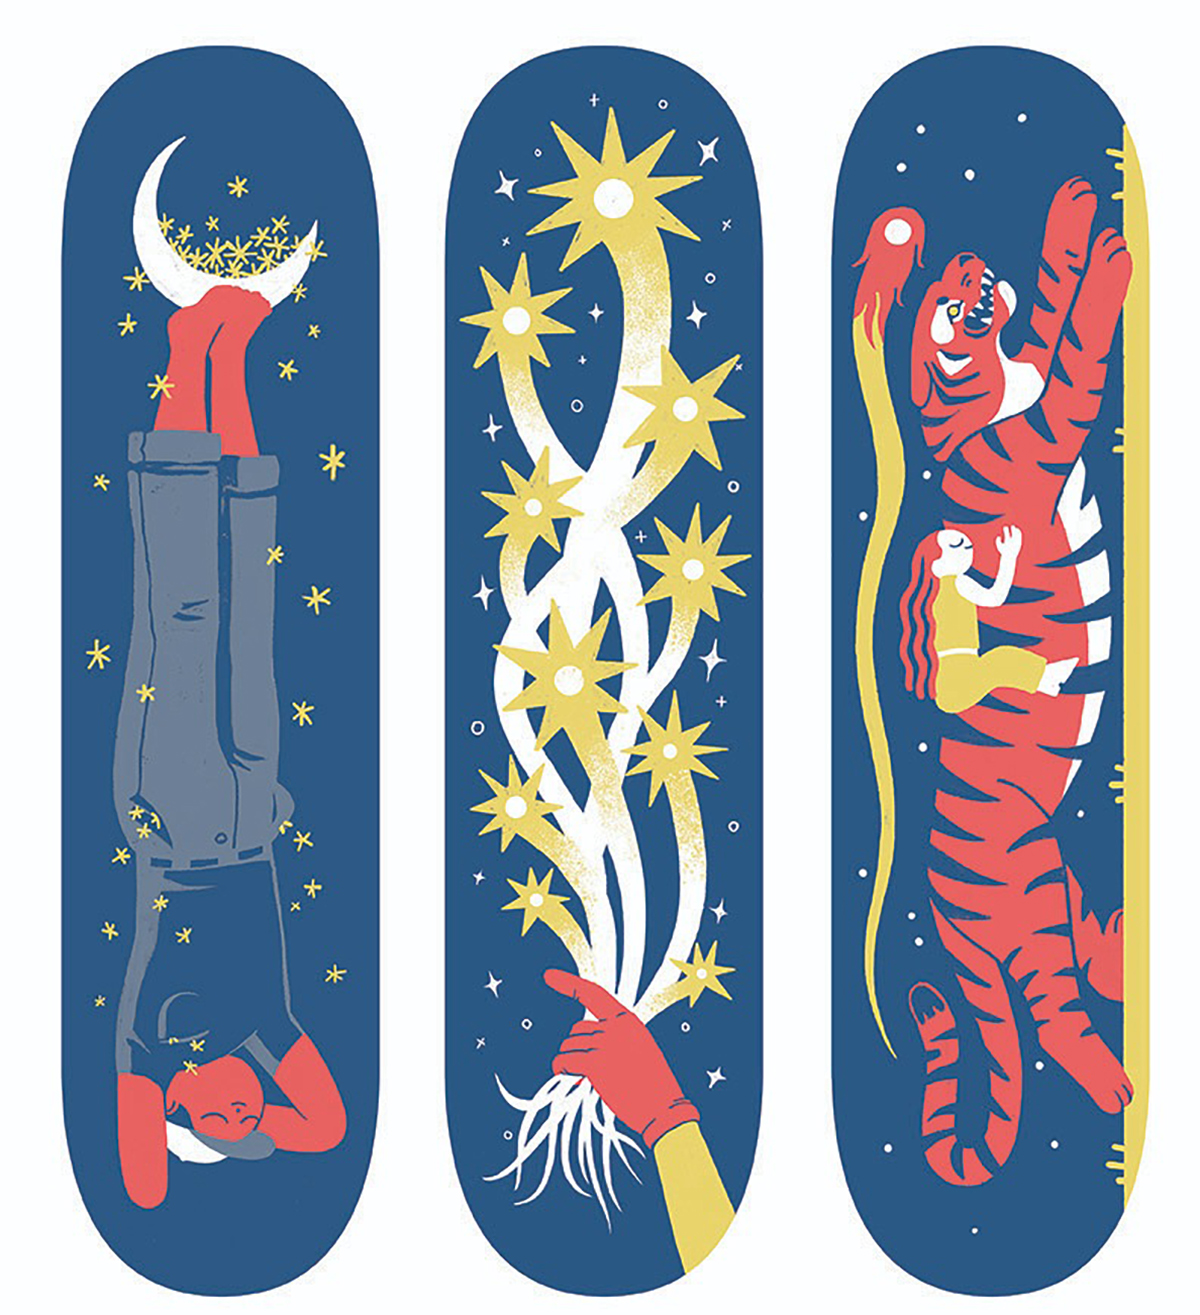 Three graphic skateboard deck designs. Left shows person sleeping under a moon and stars, middle is a hand holding a shooting stars bouquet, right is a women riding a tiger undera shooting comet